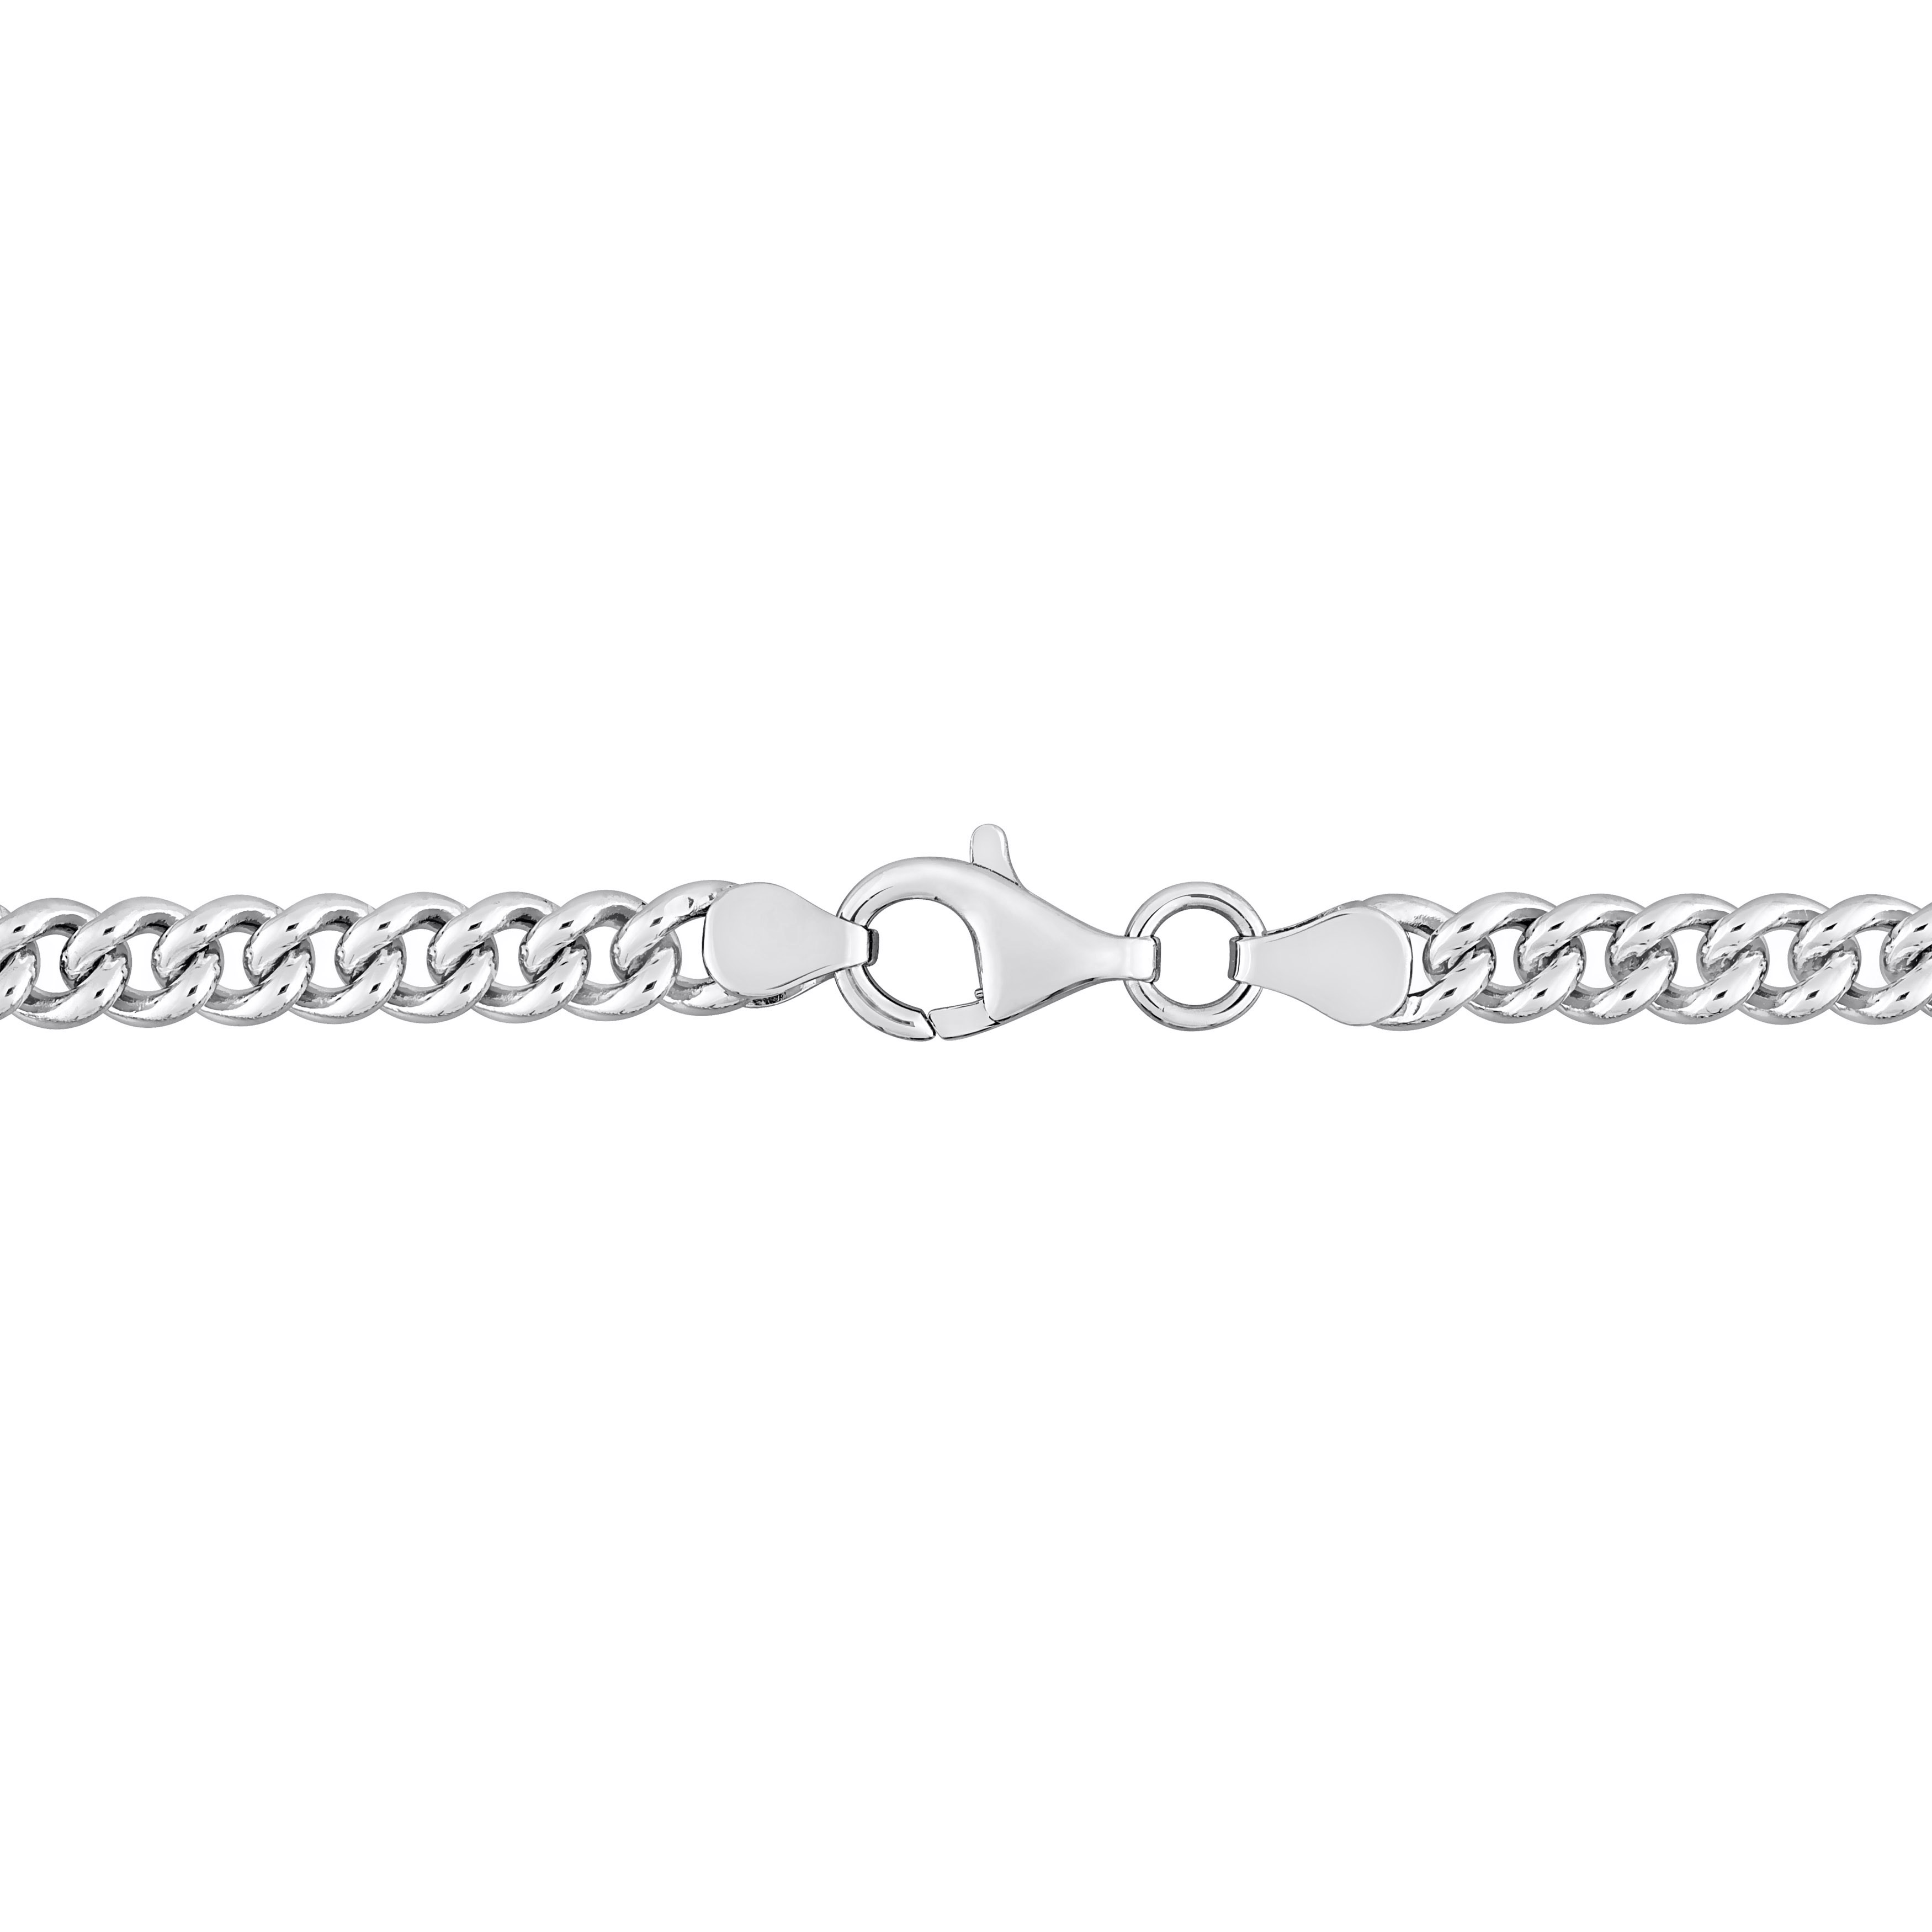 7/8 CT TGW Octagon Created Emerald Curb Link Chain Bracelet in Sterling Silver - 7.5 in.